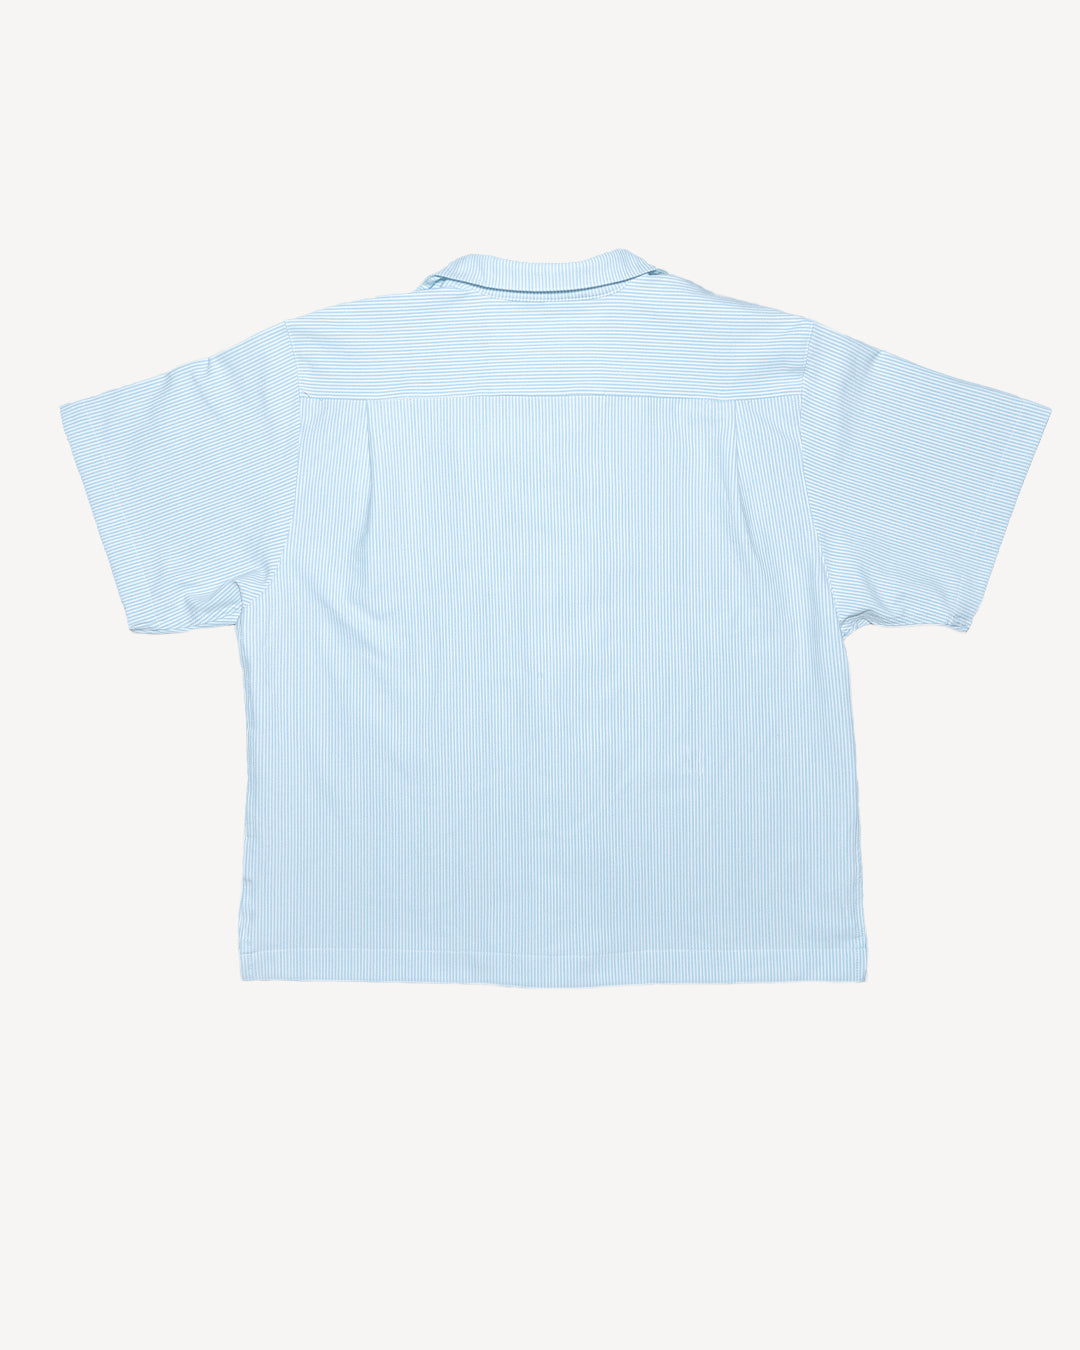 Textured Shirt in Pale Blue